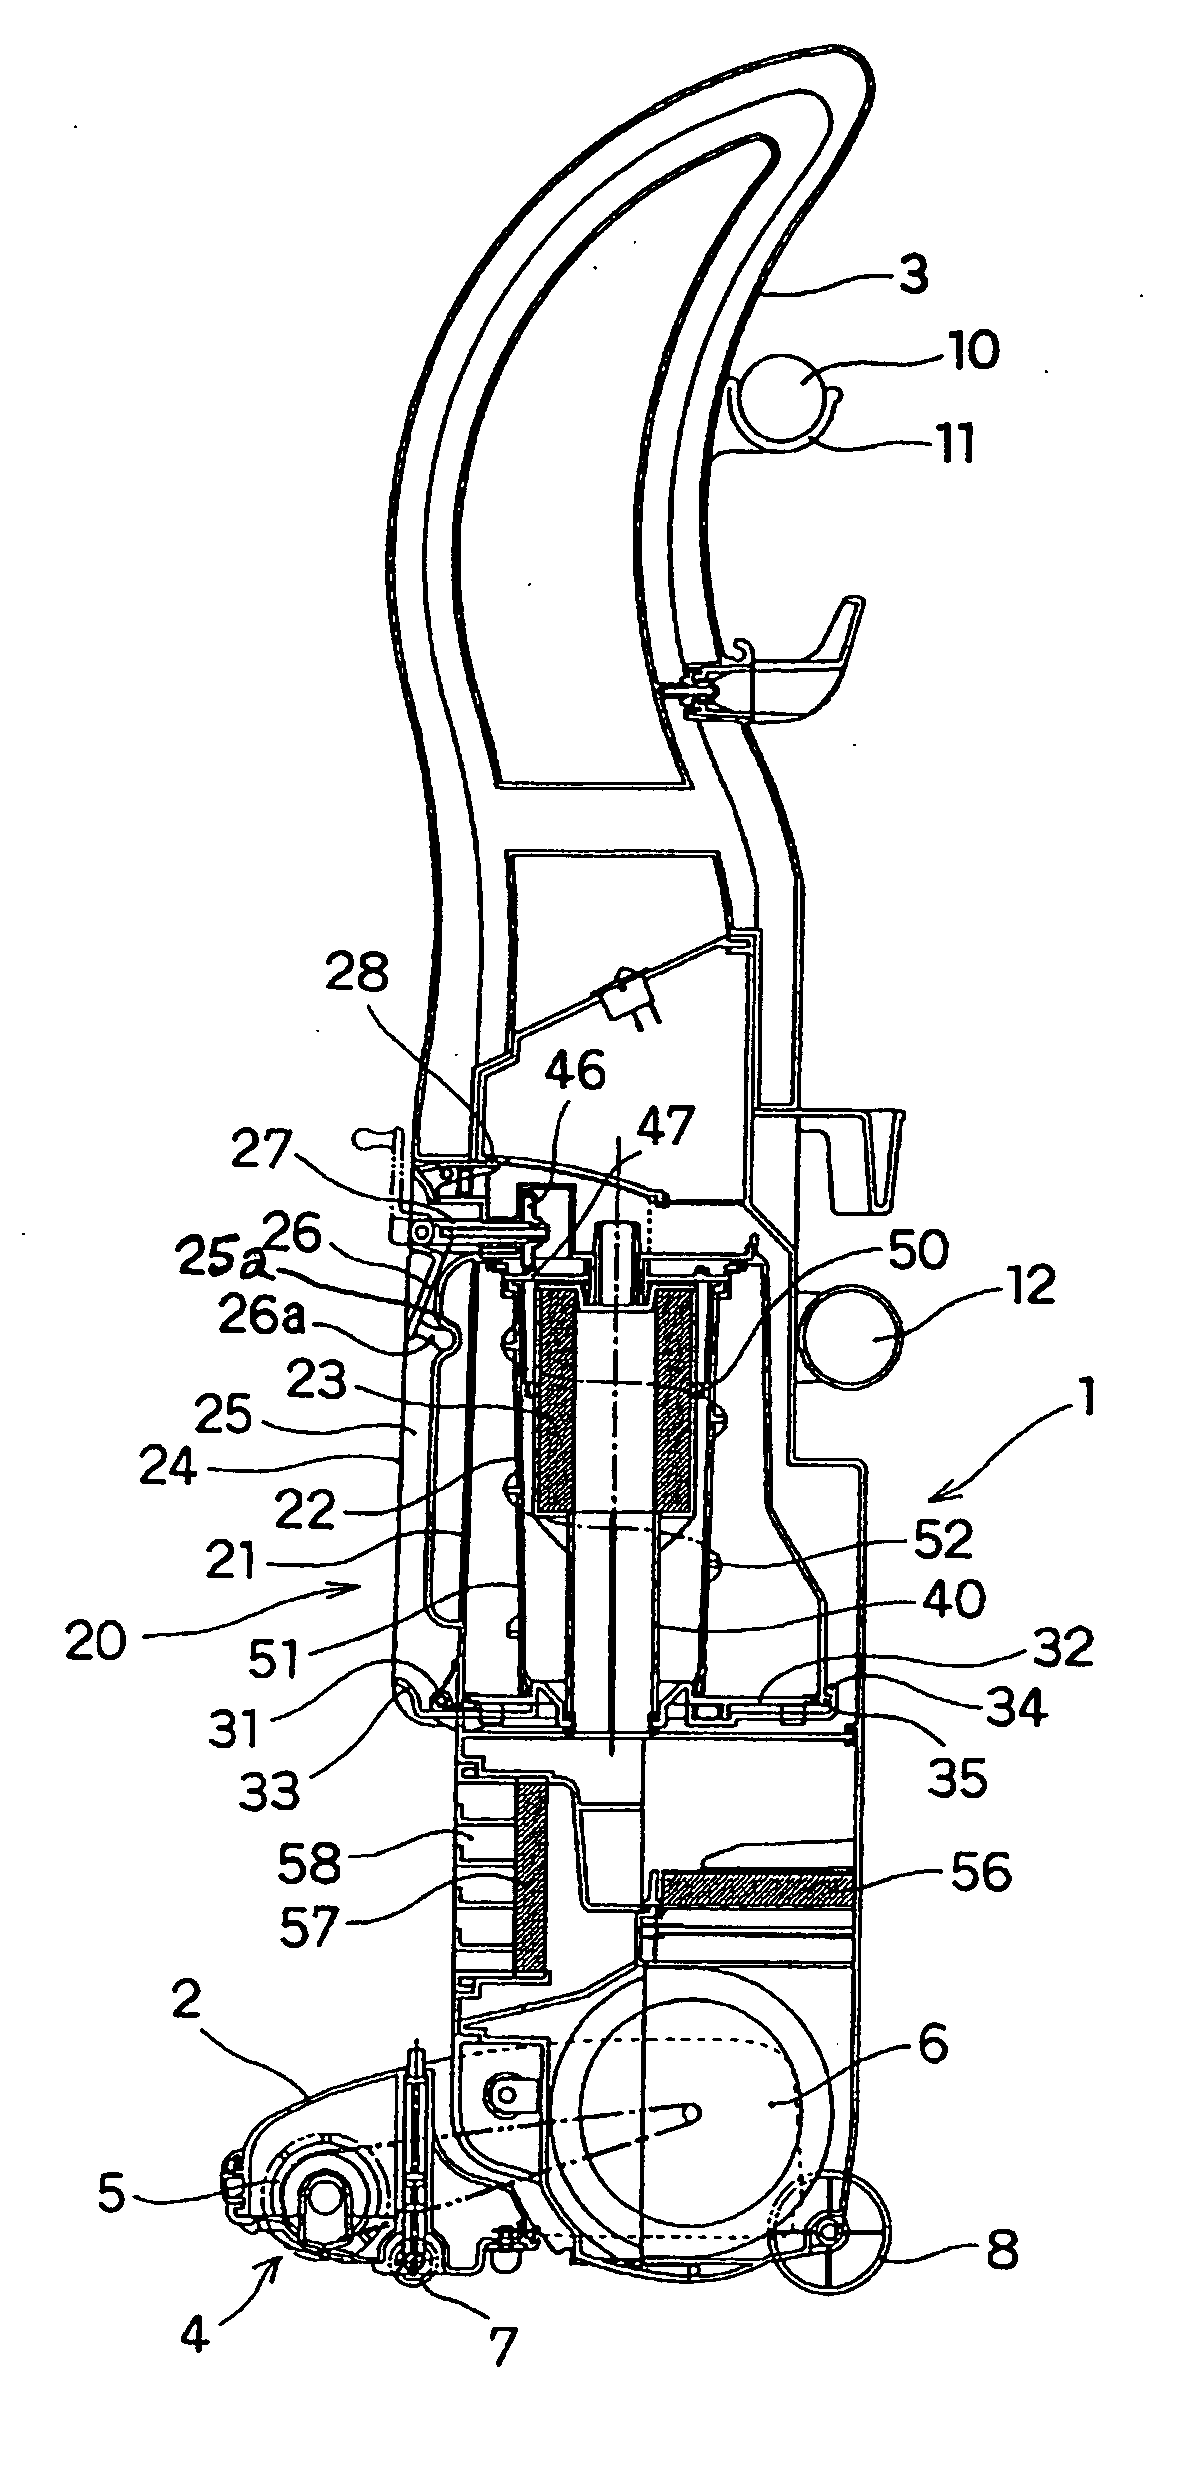 Dirt separation and collection assembly for vacuum cleaner